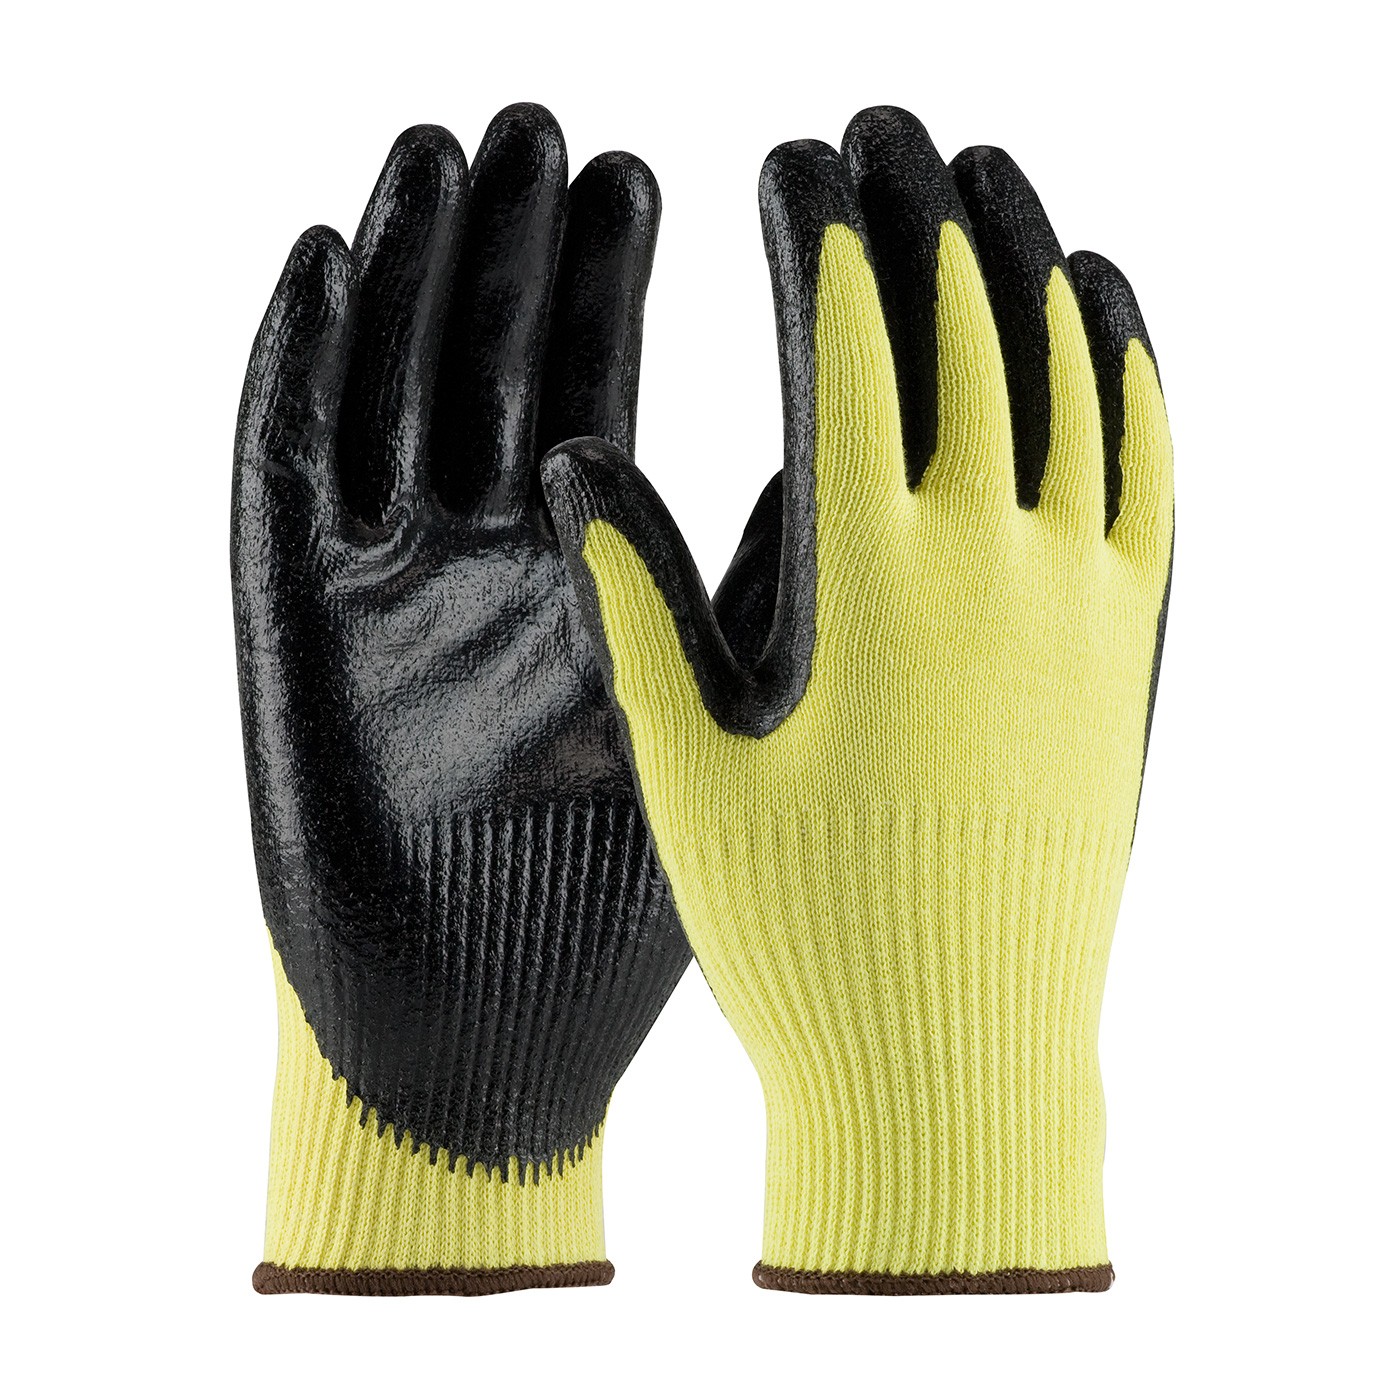 G-Tek® KEV™ Seamless Knit Kevlar® Glove with Nitrile Coated Smooth Grip on Palm & Fingers - Medium Weight  (#09-K1400)